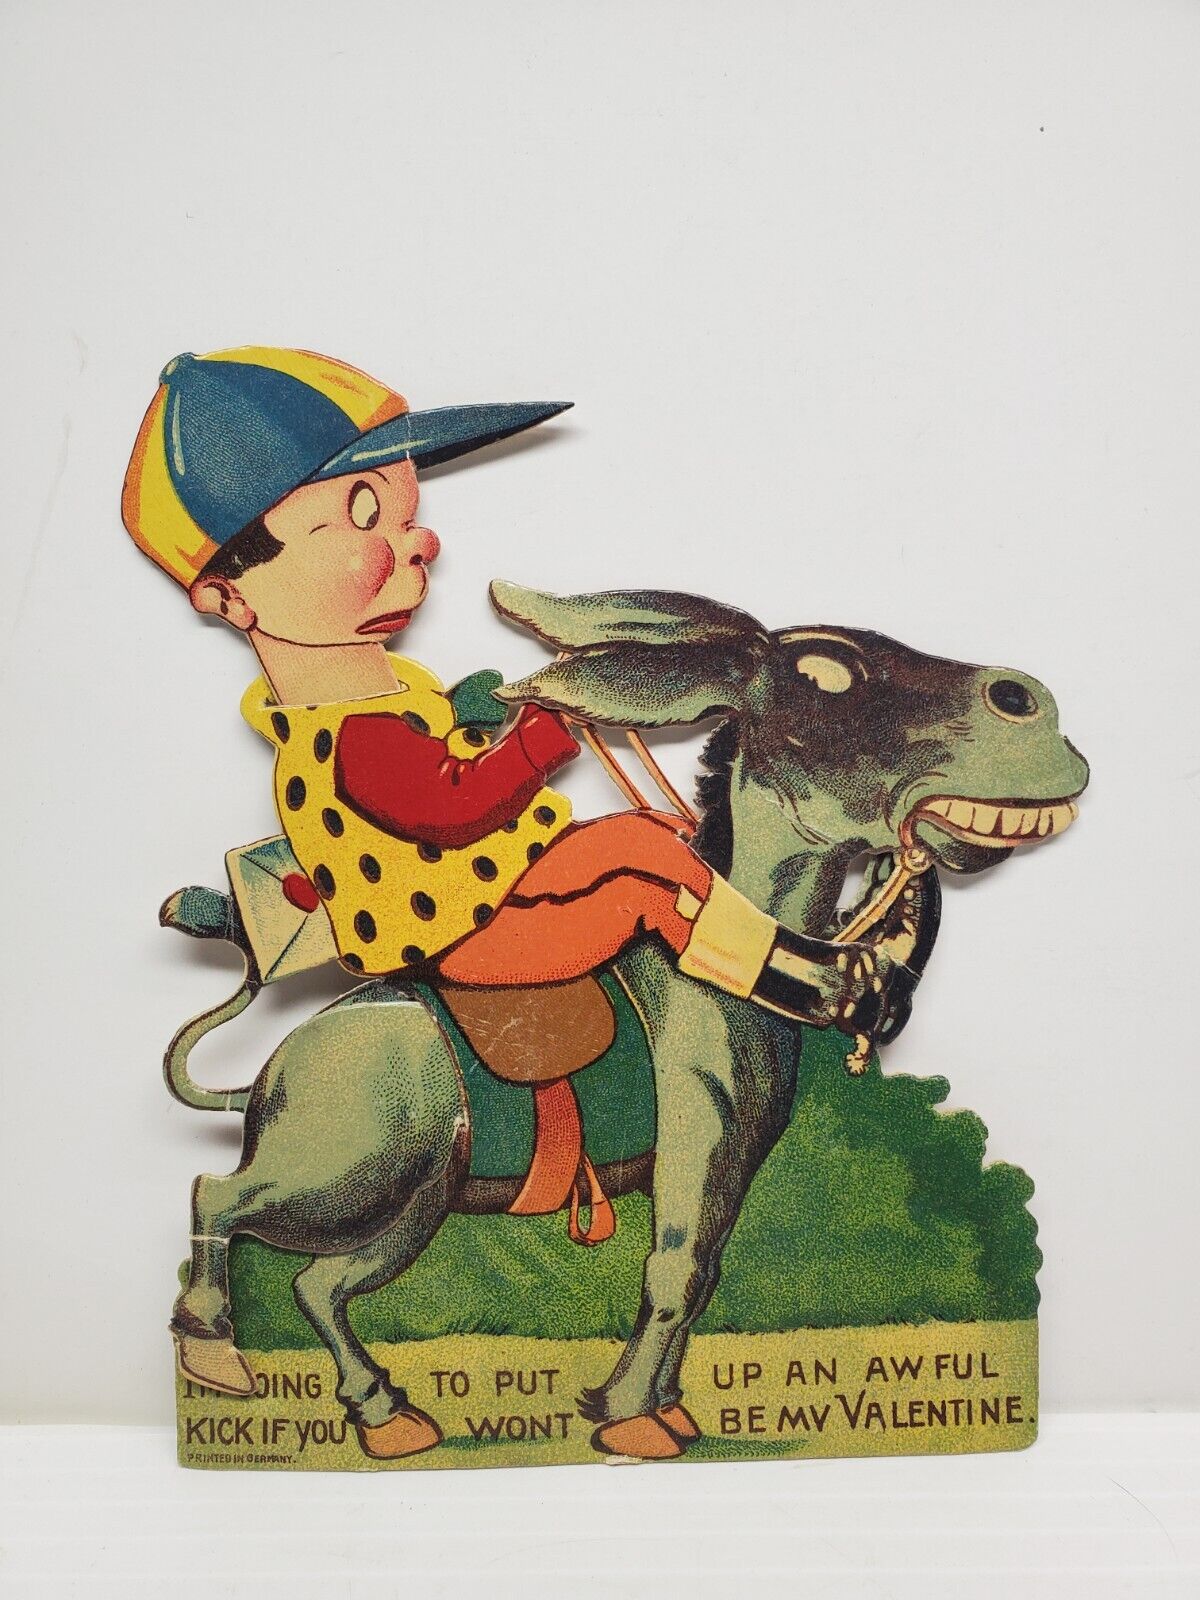 Awful Kick Vintage Mechanical Valentines Card Early 1900s Boy Riding Donkey